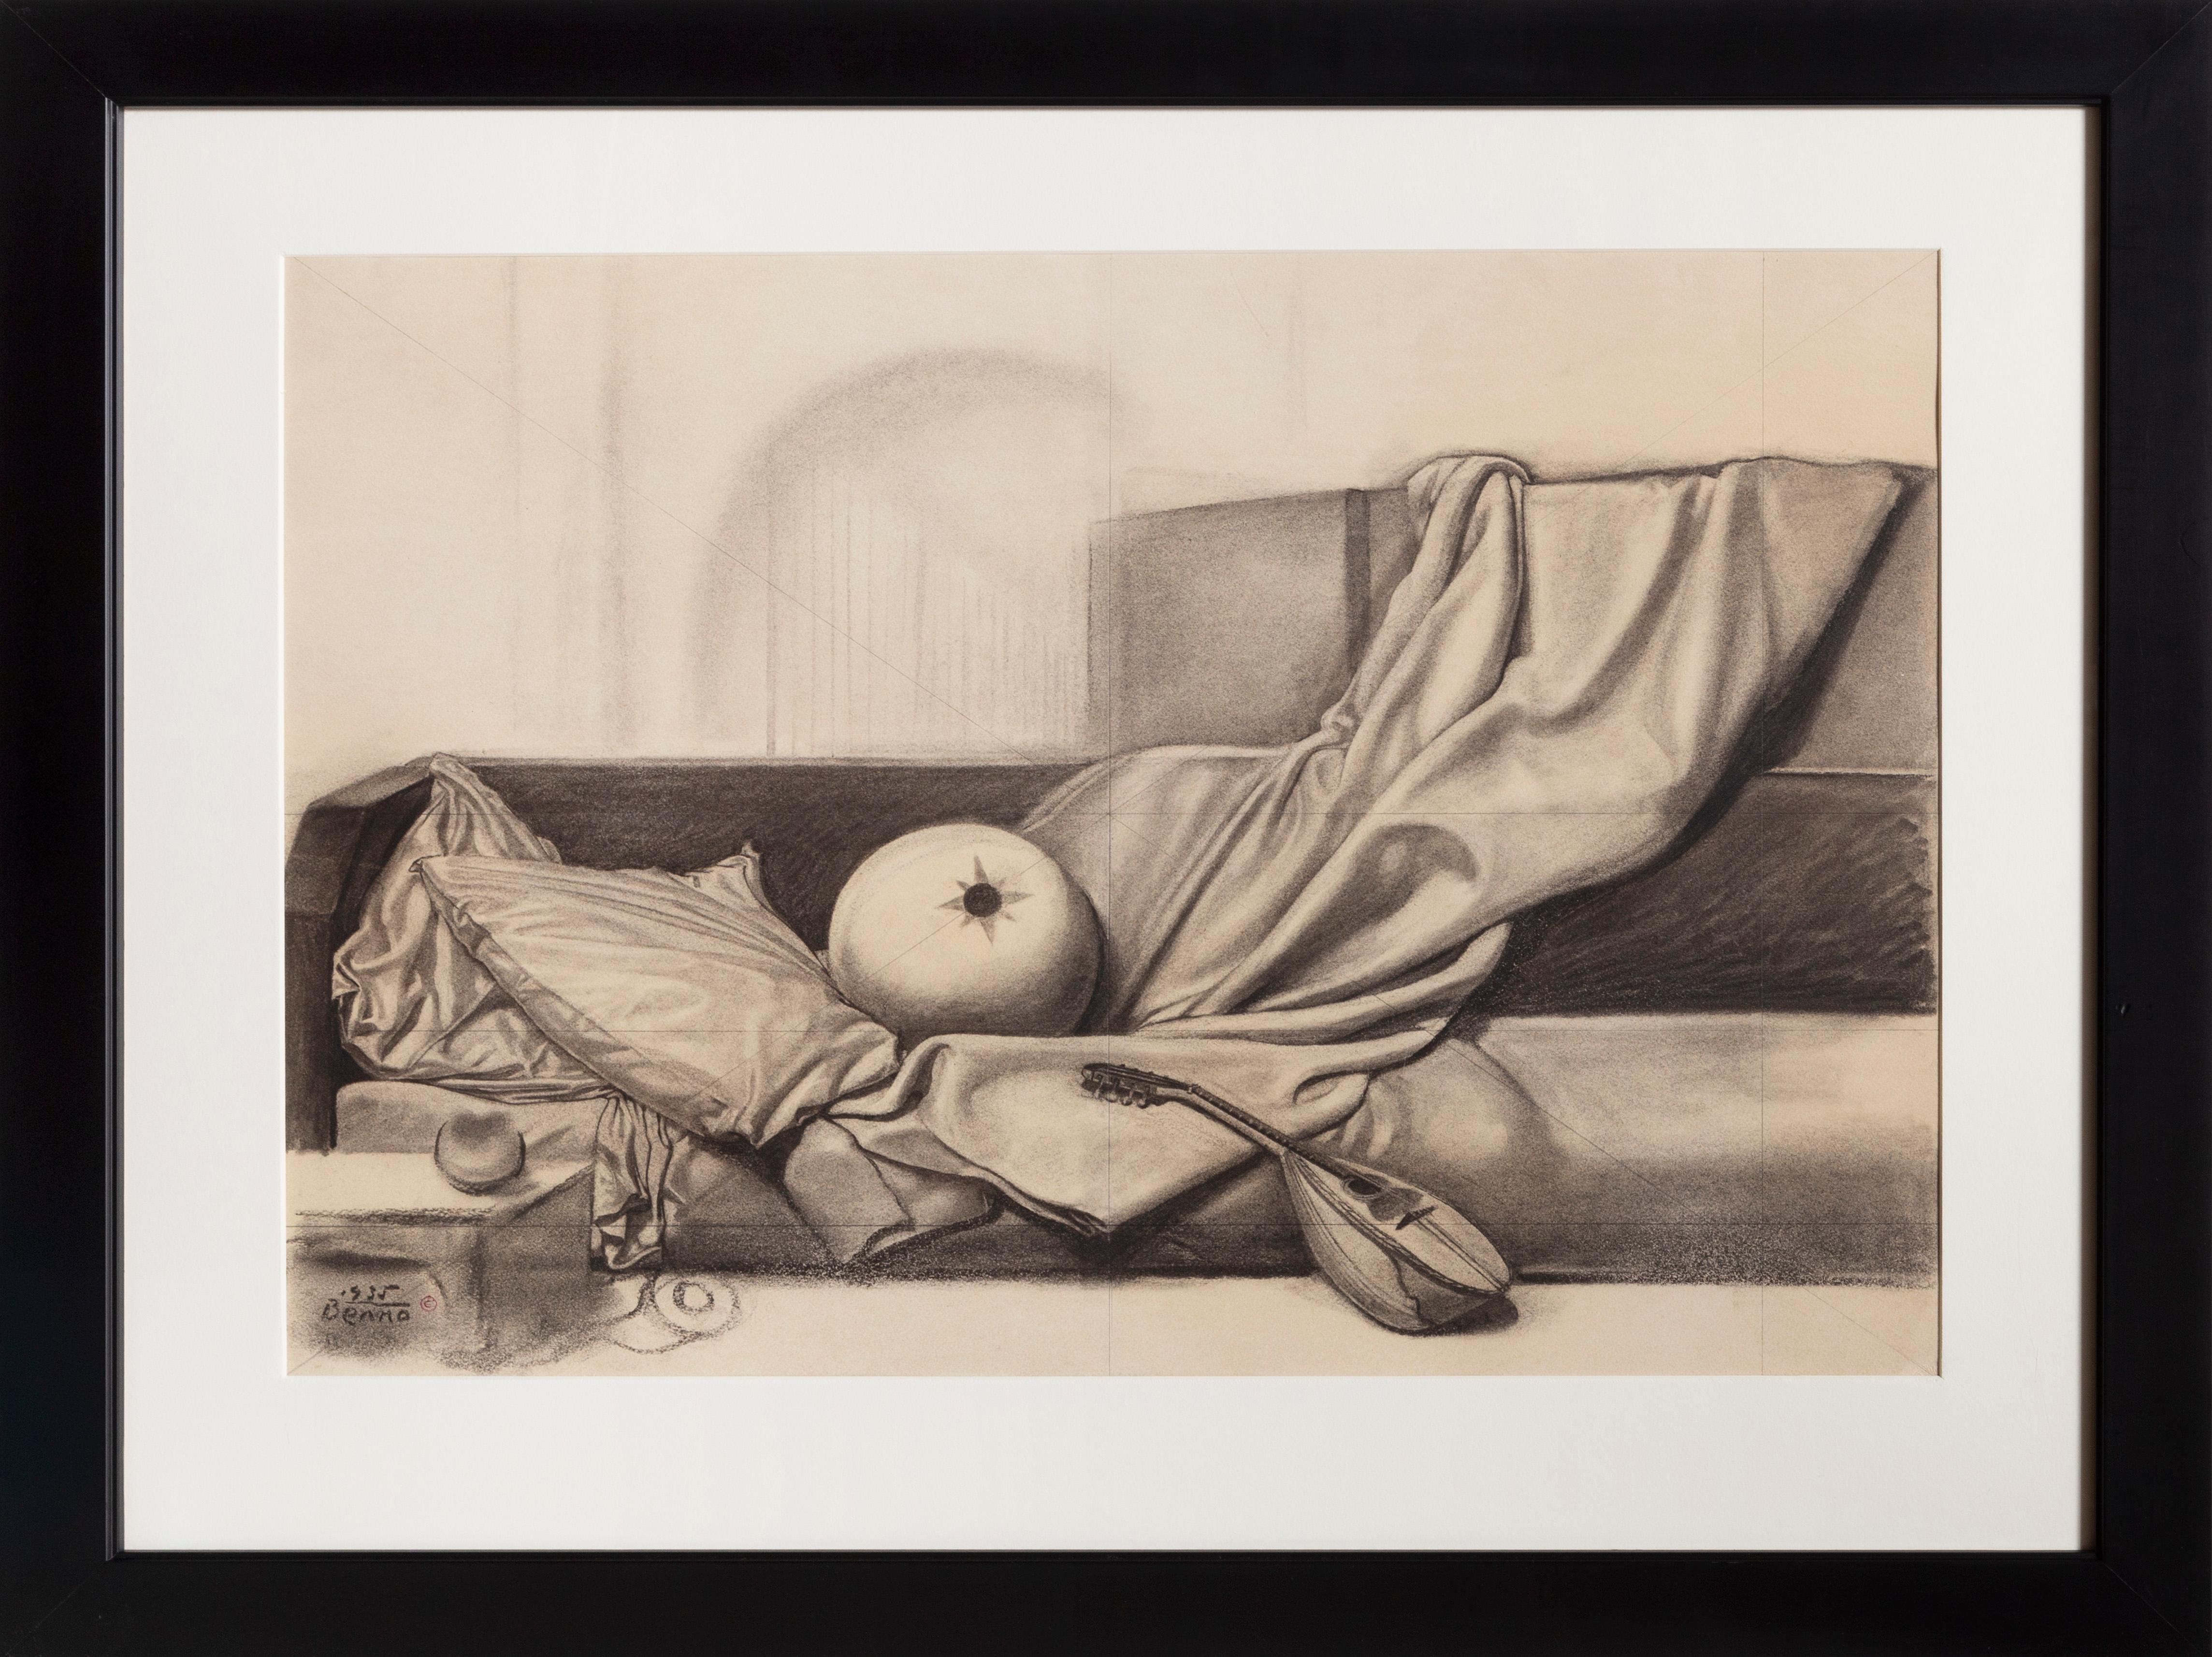 Odalisque, Surrealist Charcoal on Paper Drawing by Benjamin Benno